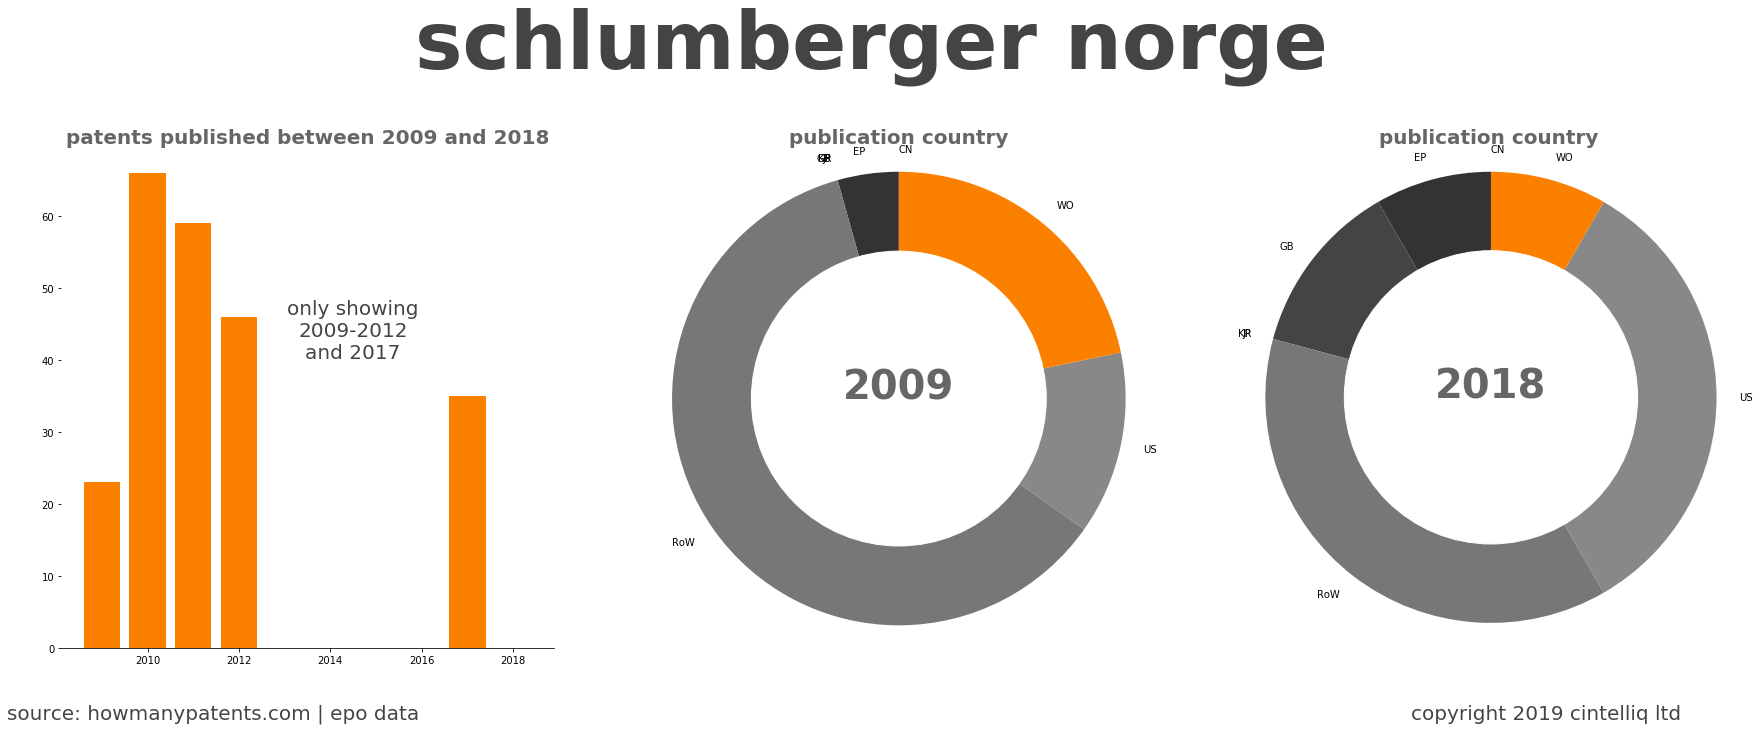 summary of patents for Schlumberger Norge